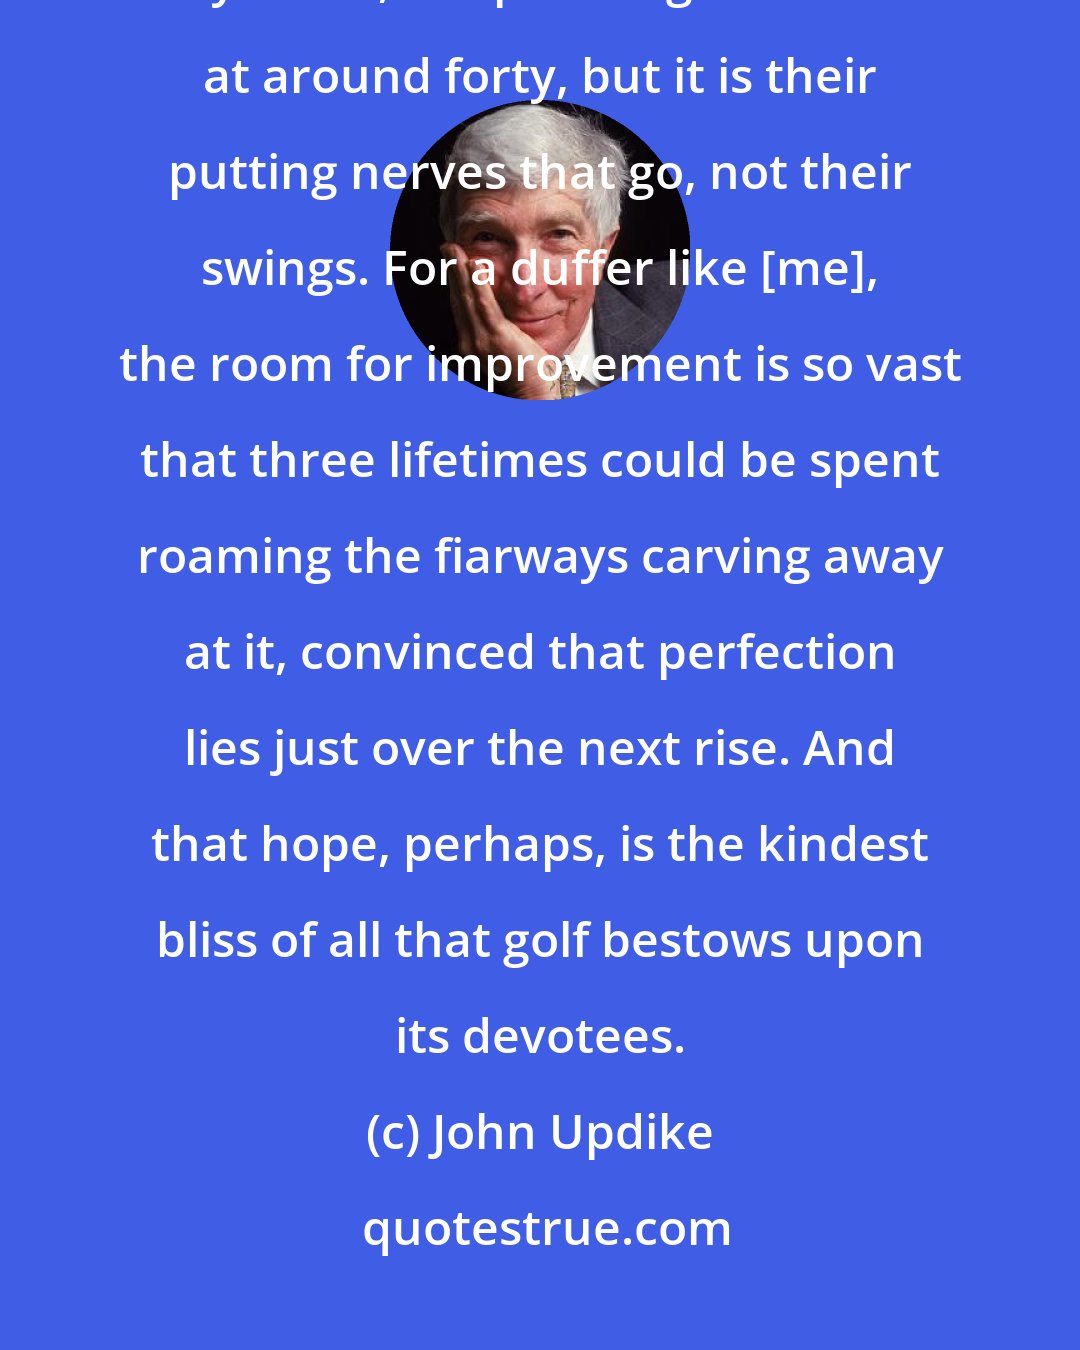 John Updike: What other sport holds out hope of improvement to a man or a woman over fifty? True, the pros begin to falter at around forty, but it is their putting nerves that go, not their swings. For a duffer like [me], the room for improvement is so vast that three lifetimes could be spent roaming the fiarways carving away at it, convinced that perfection lies just over the next rise. And that hope, perhaps, is the kindest bliss of all that golf bestows upon its devotees.